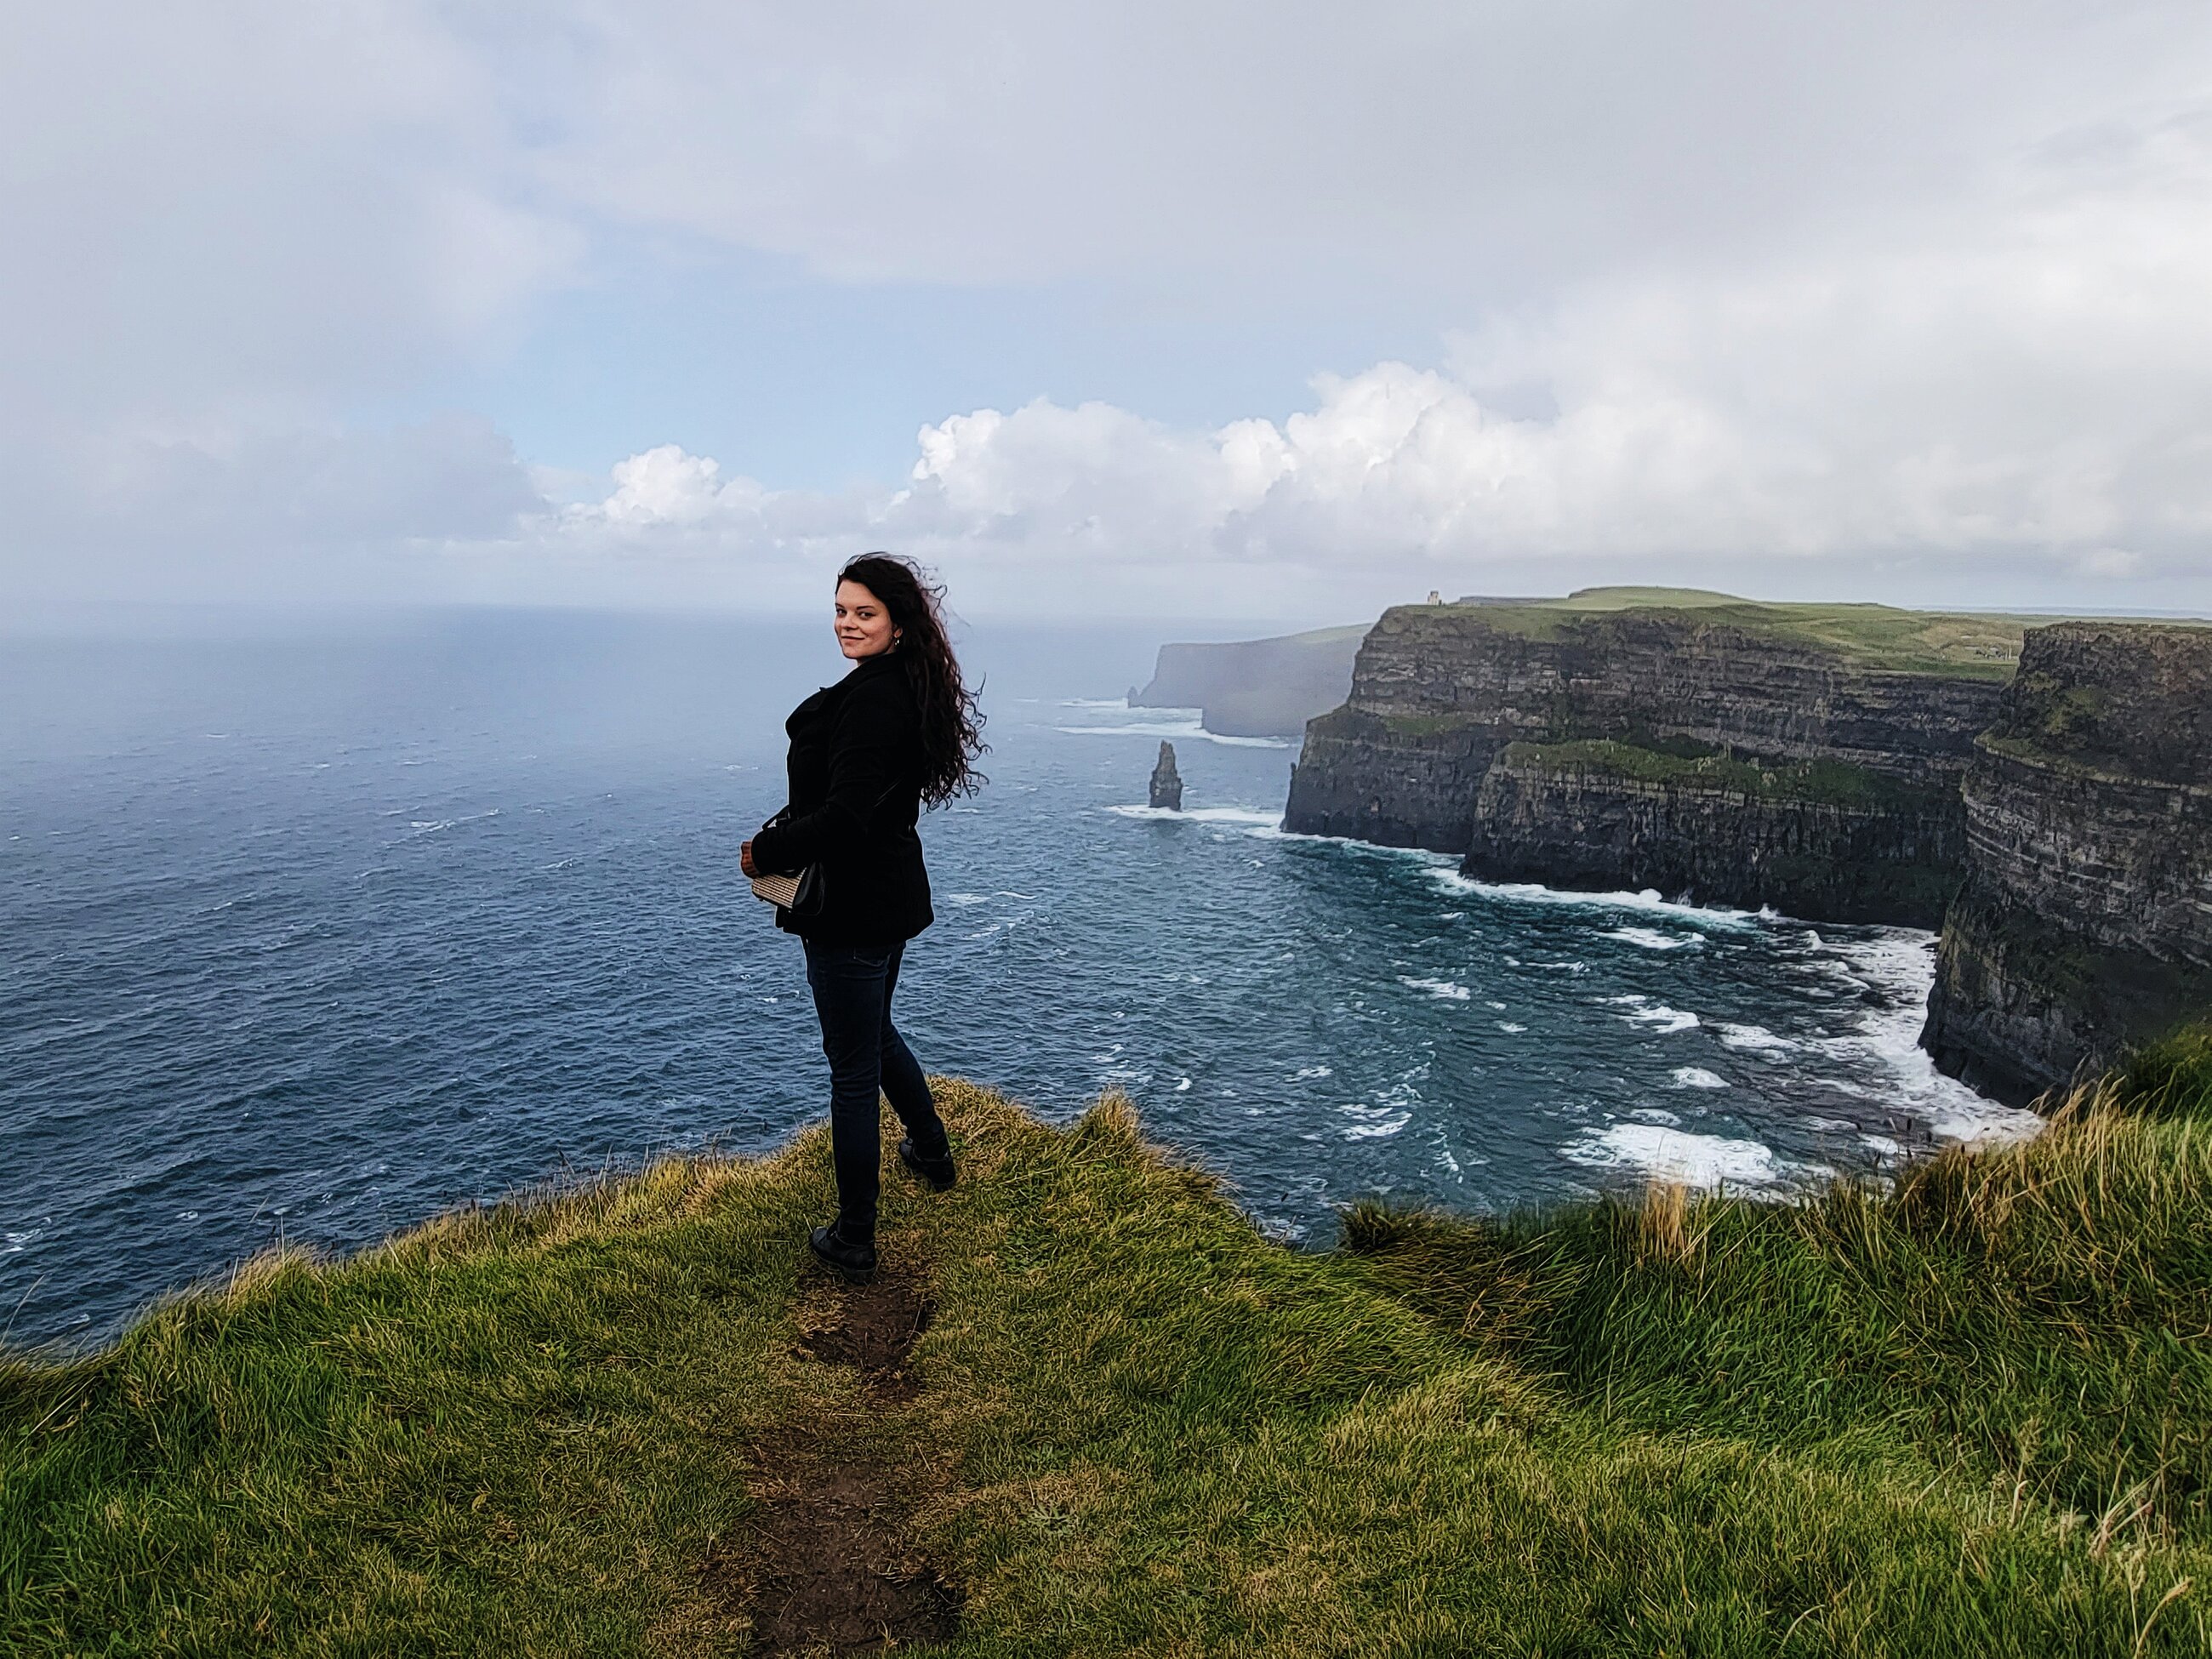 Cliffs of Moher, Co. Clare